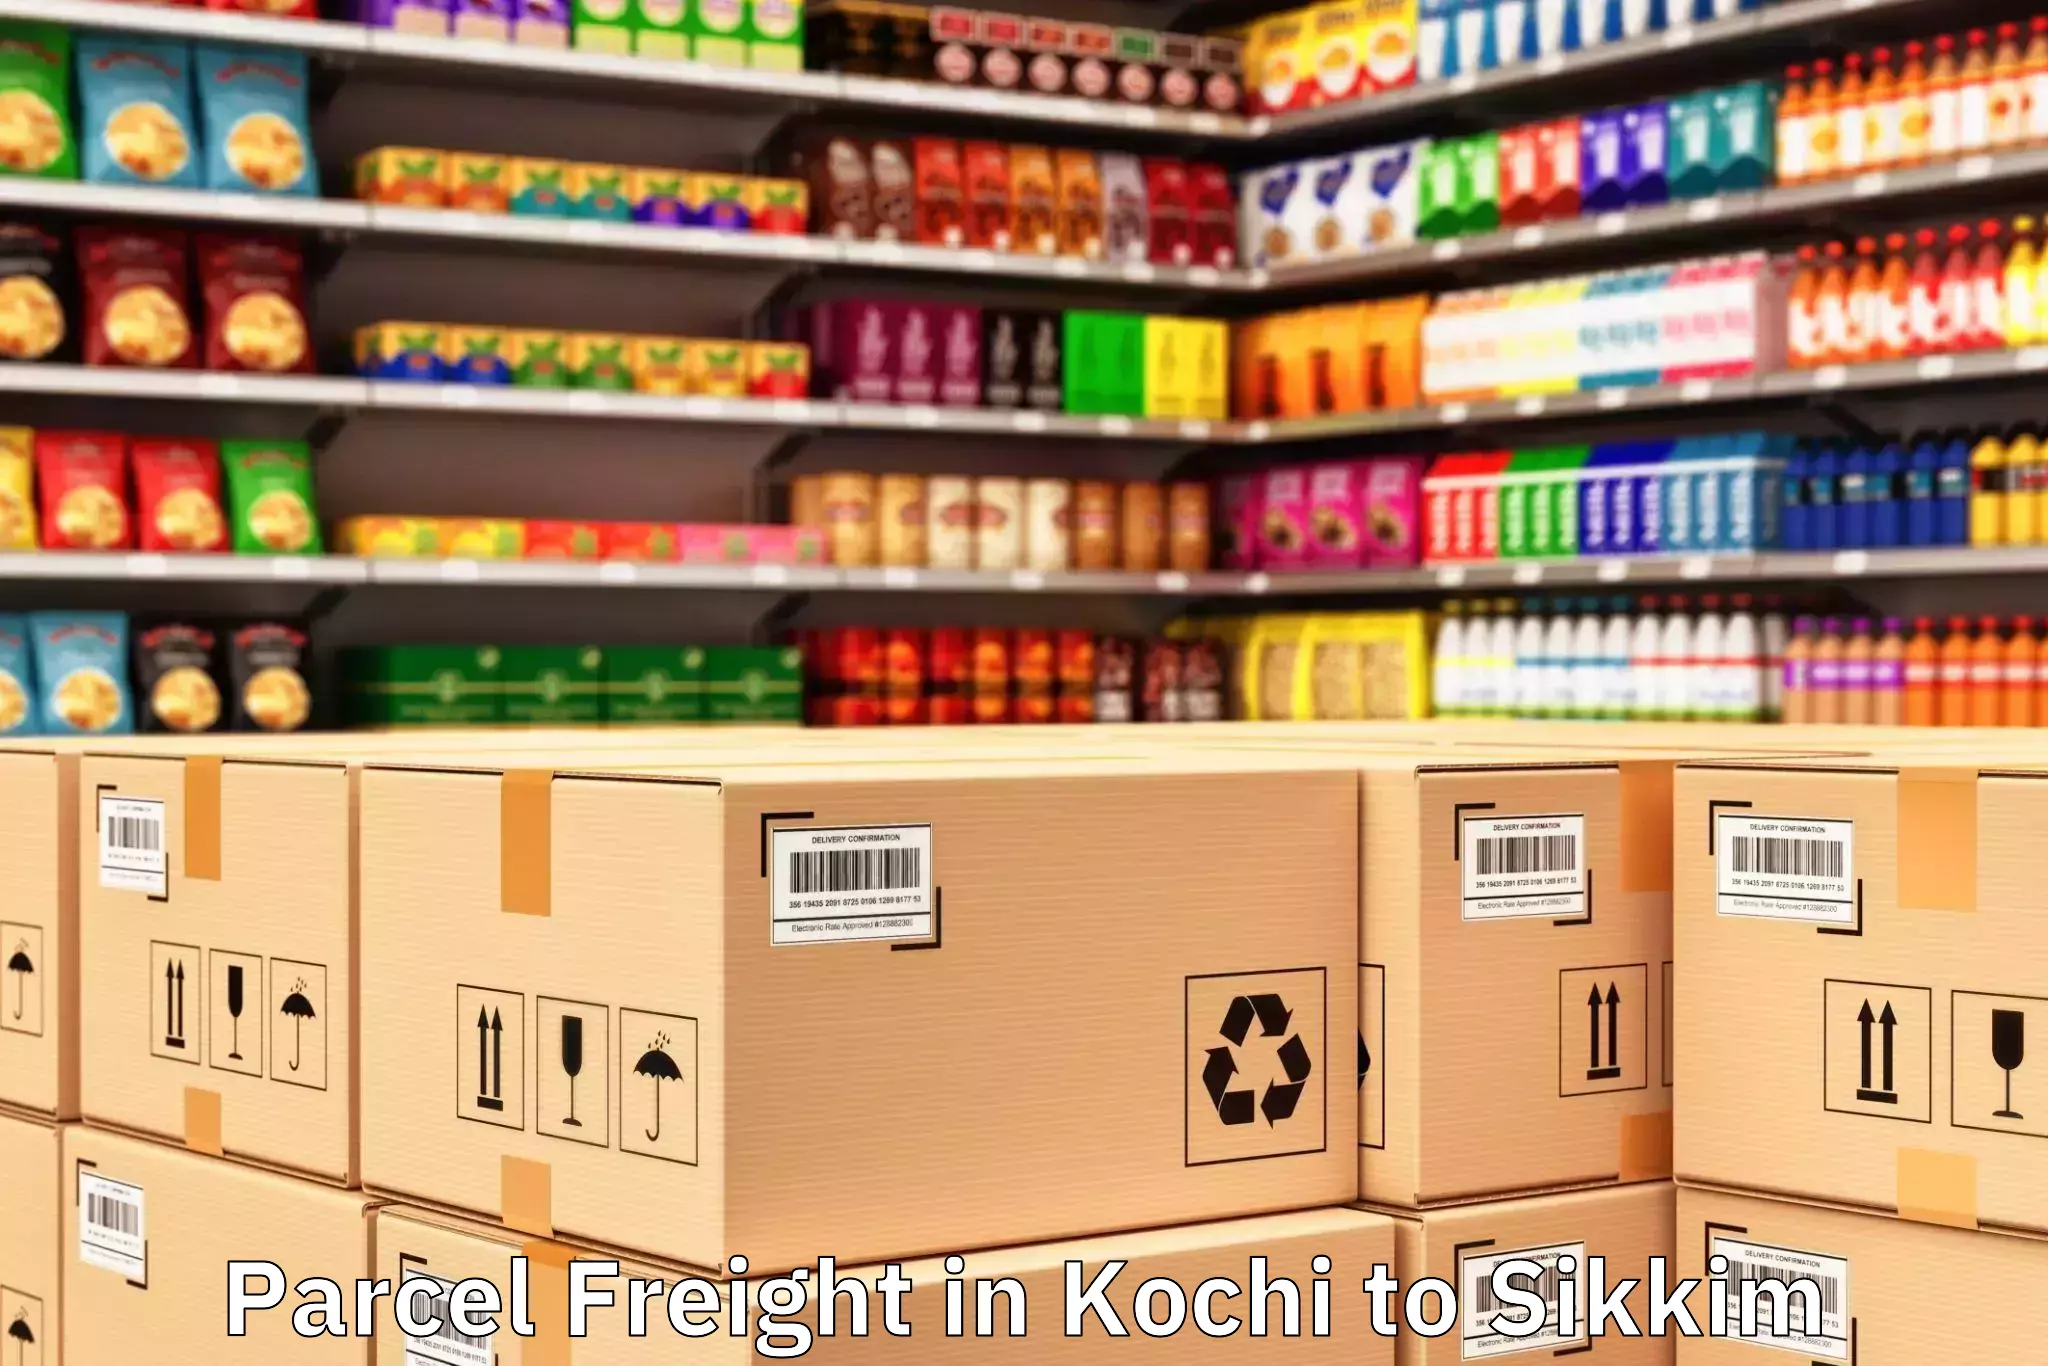 Reliable Kochi to Eiilm University Jorethang Parcel Freight